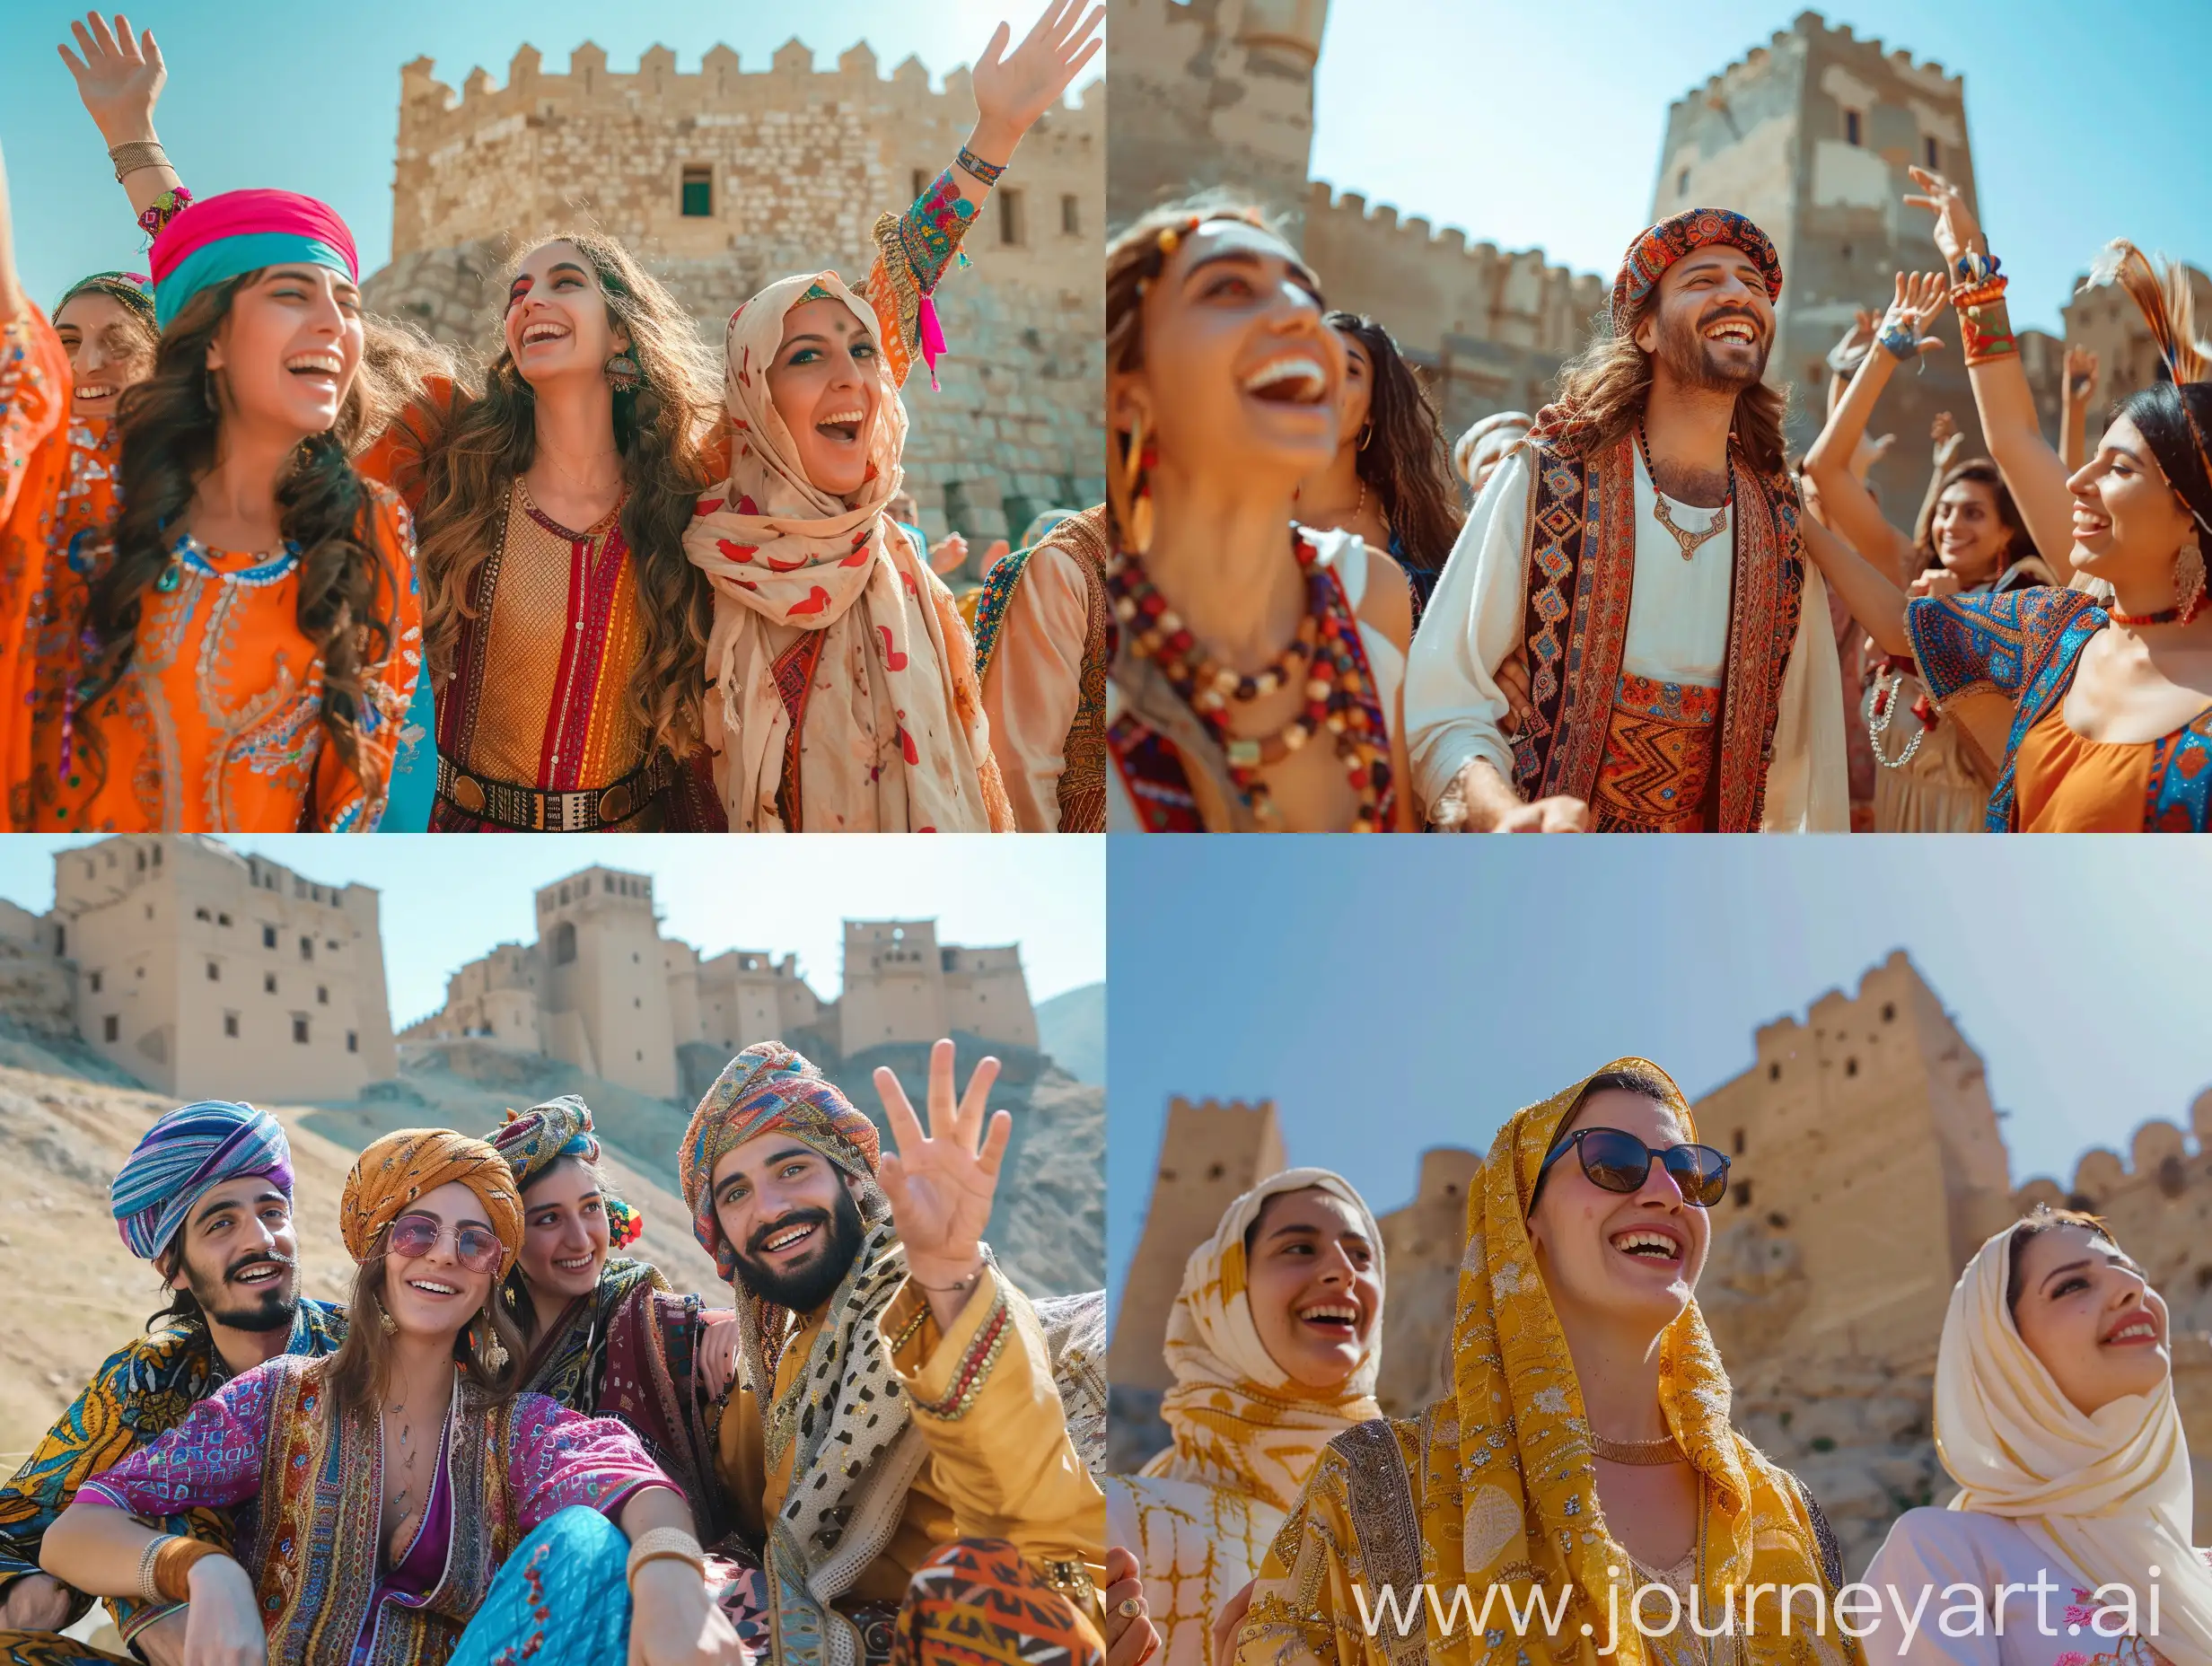 Happy-Persian-People-in-Traditional-Dress-Celebrating-by-an-Ancient-Fort-in-the-Persian-Empire